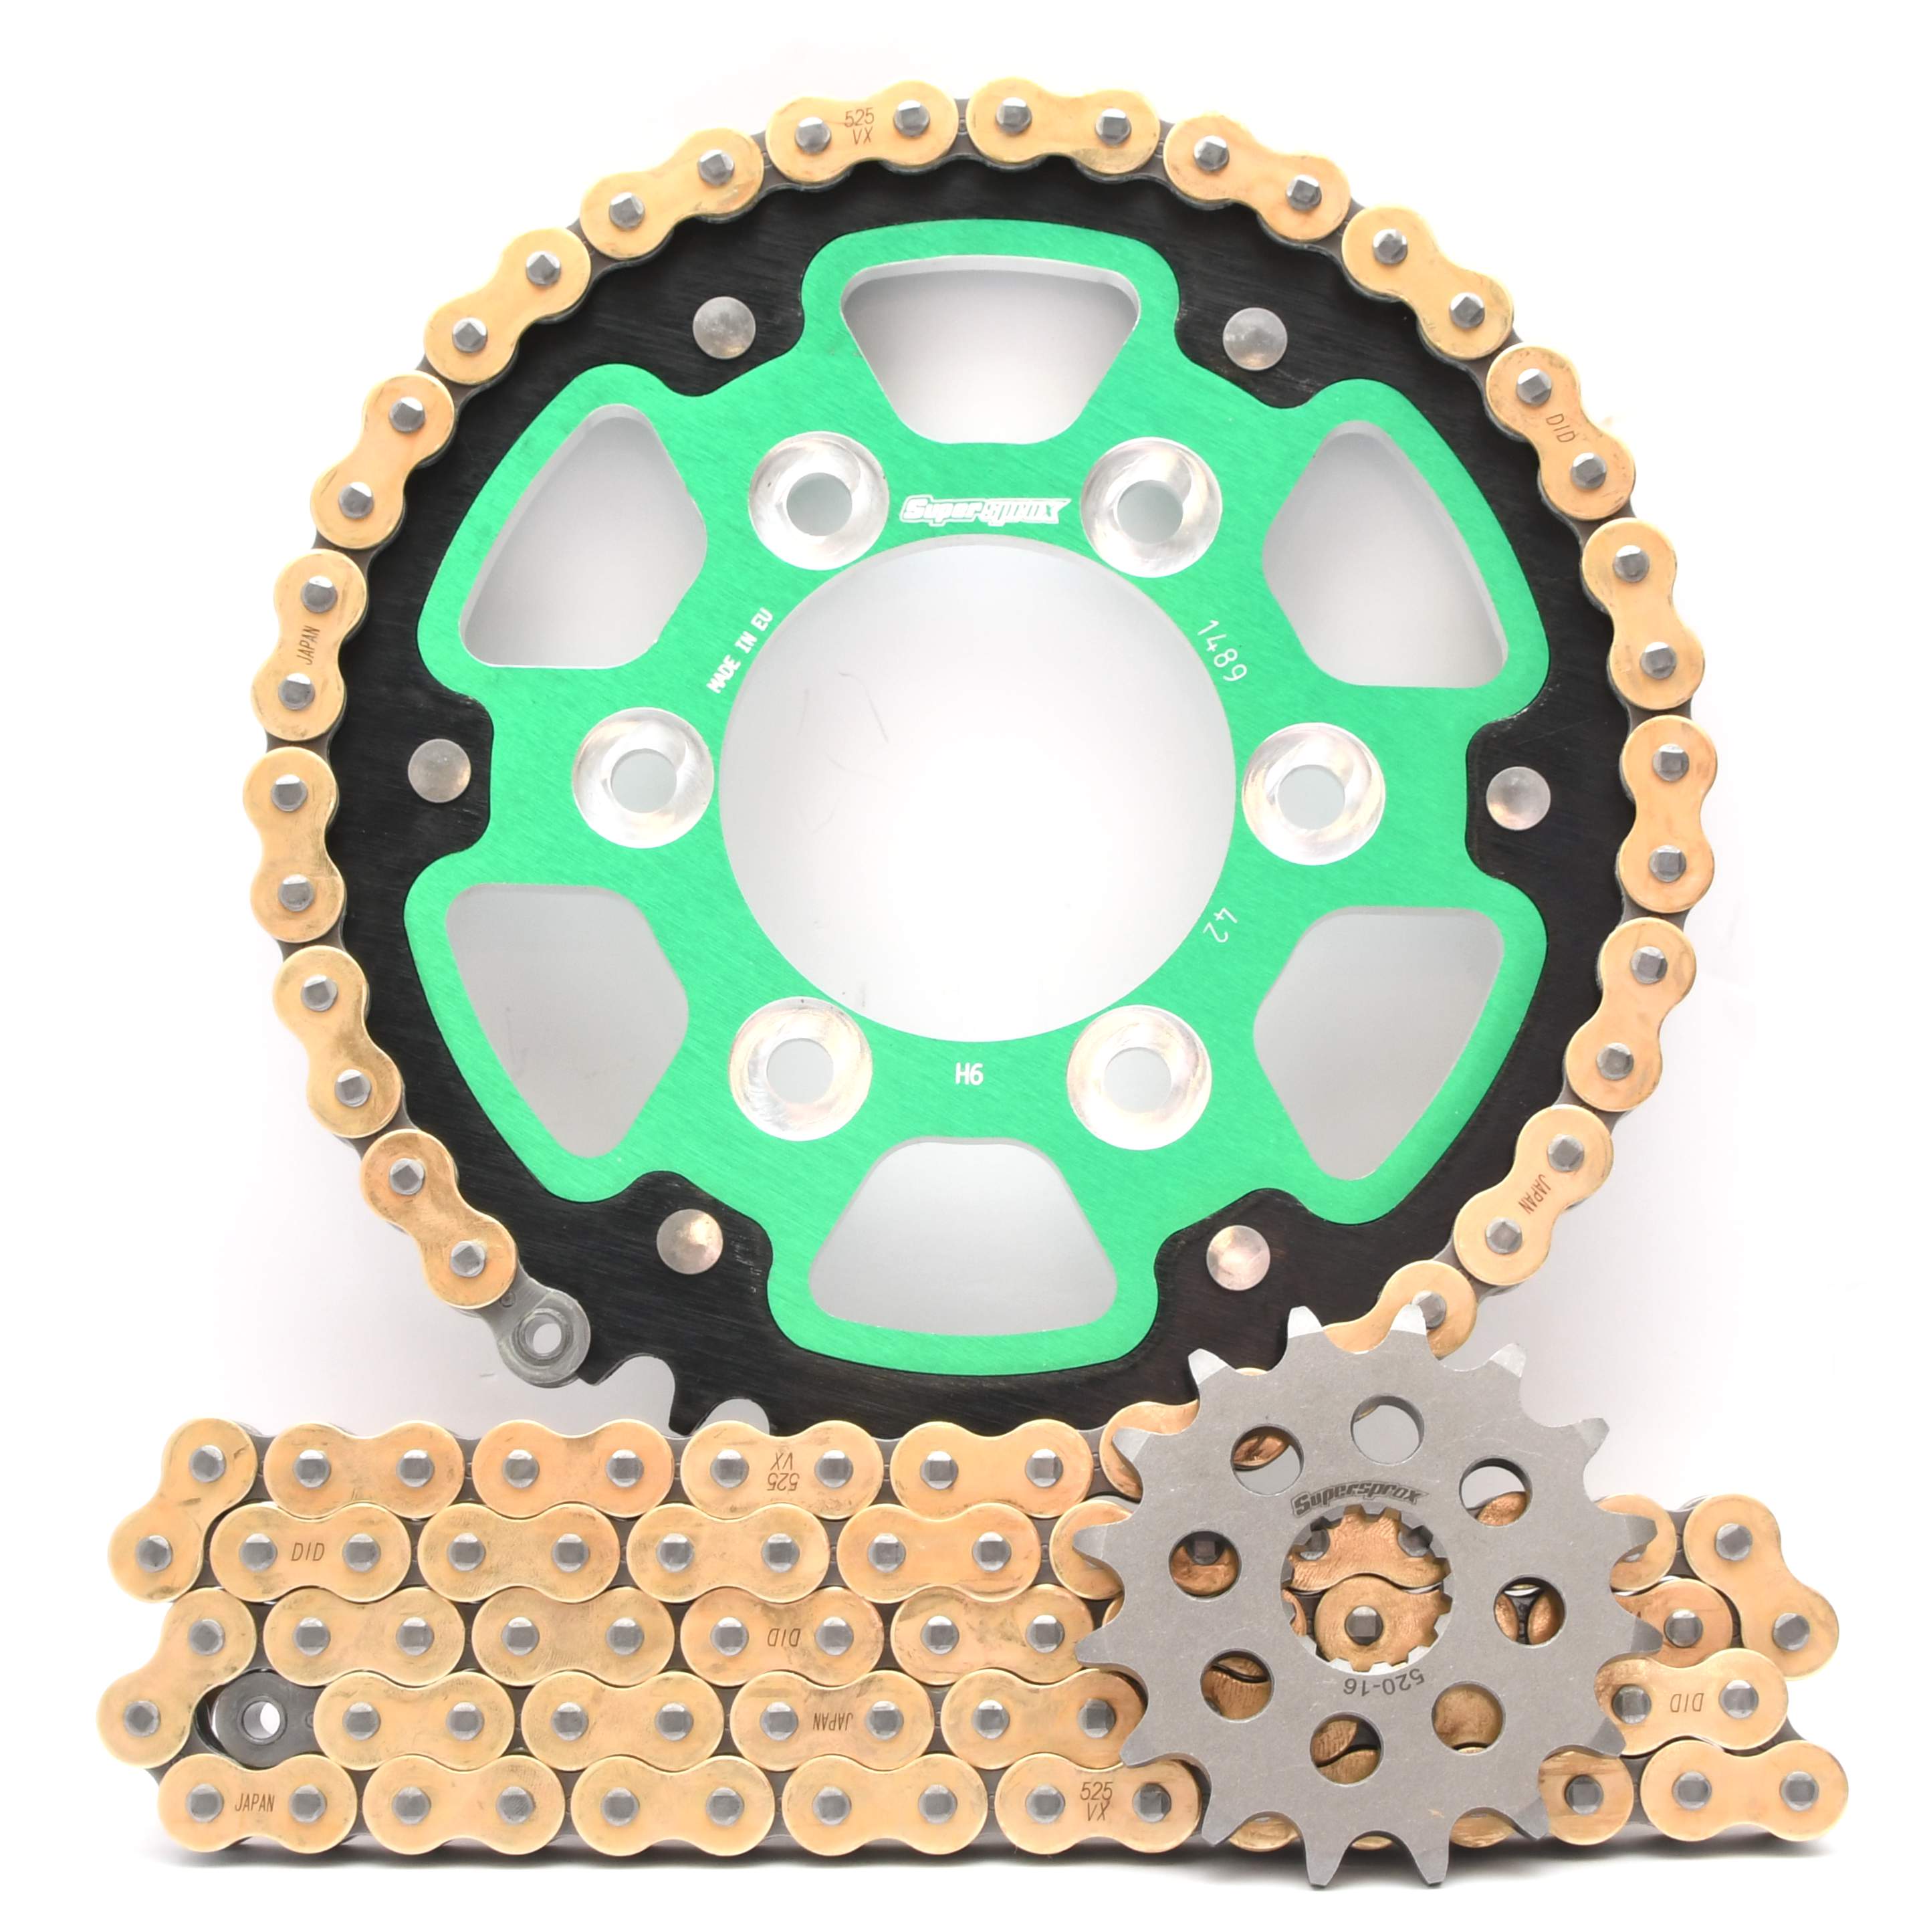 Supersprox Chain & Sprocket Kit for Kawasaki ZX7R 96-03 - Choose Your Gearing - 0